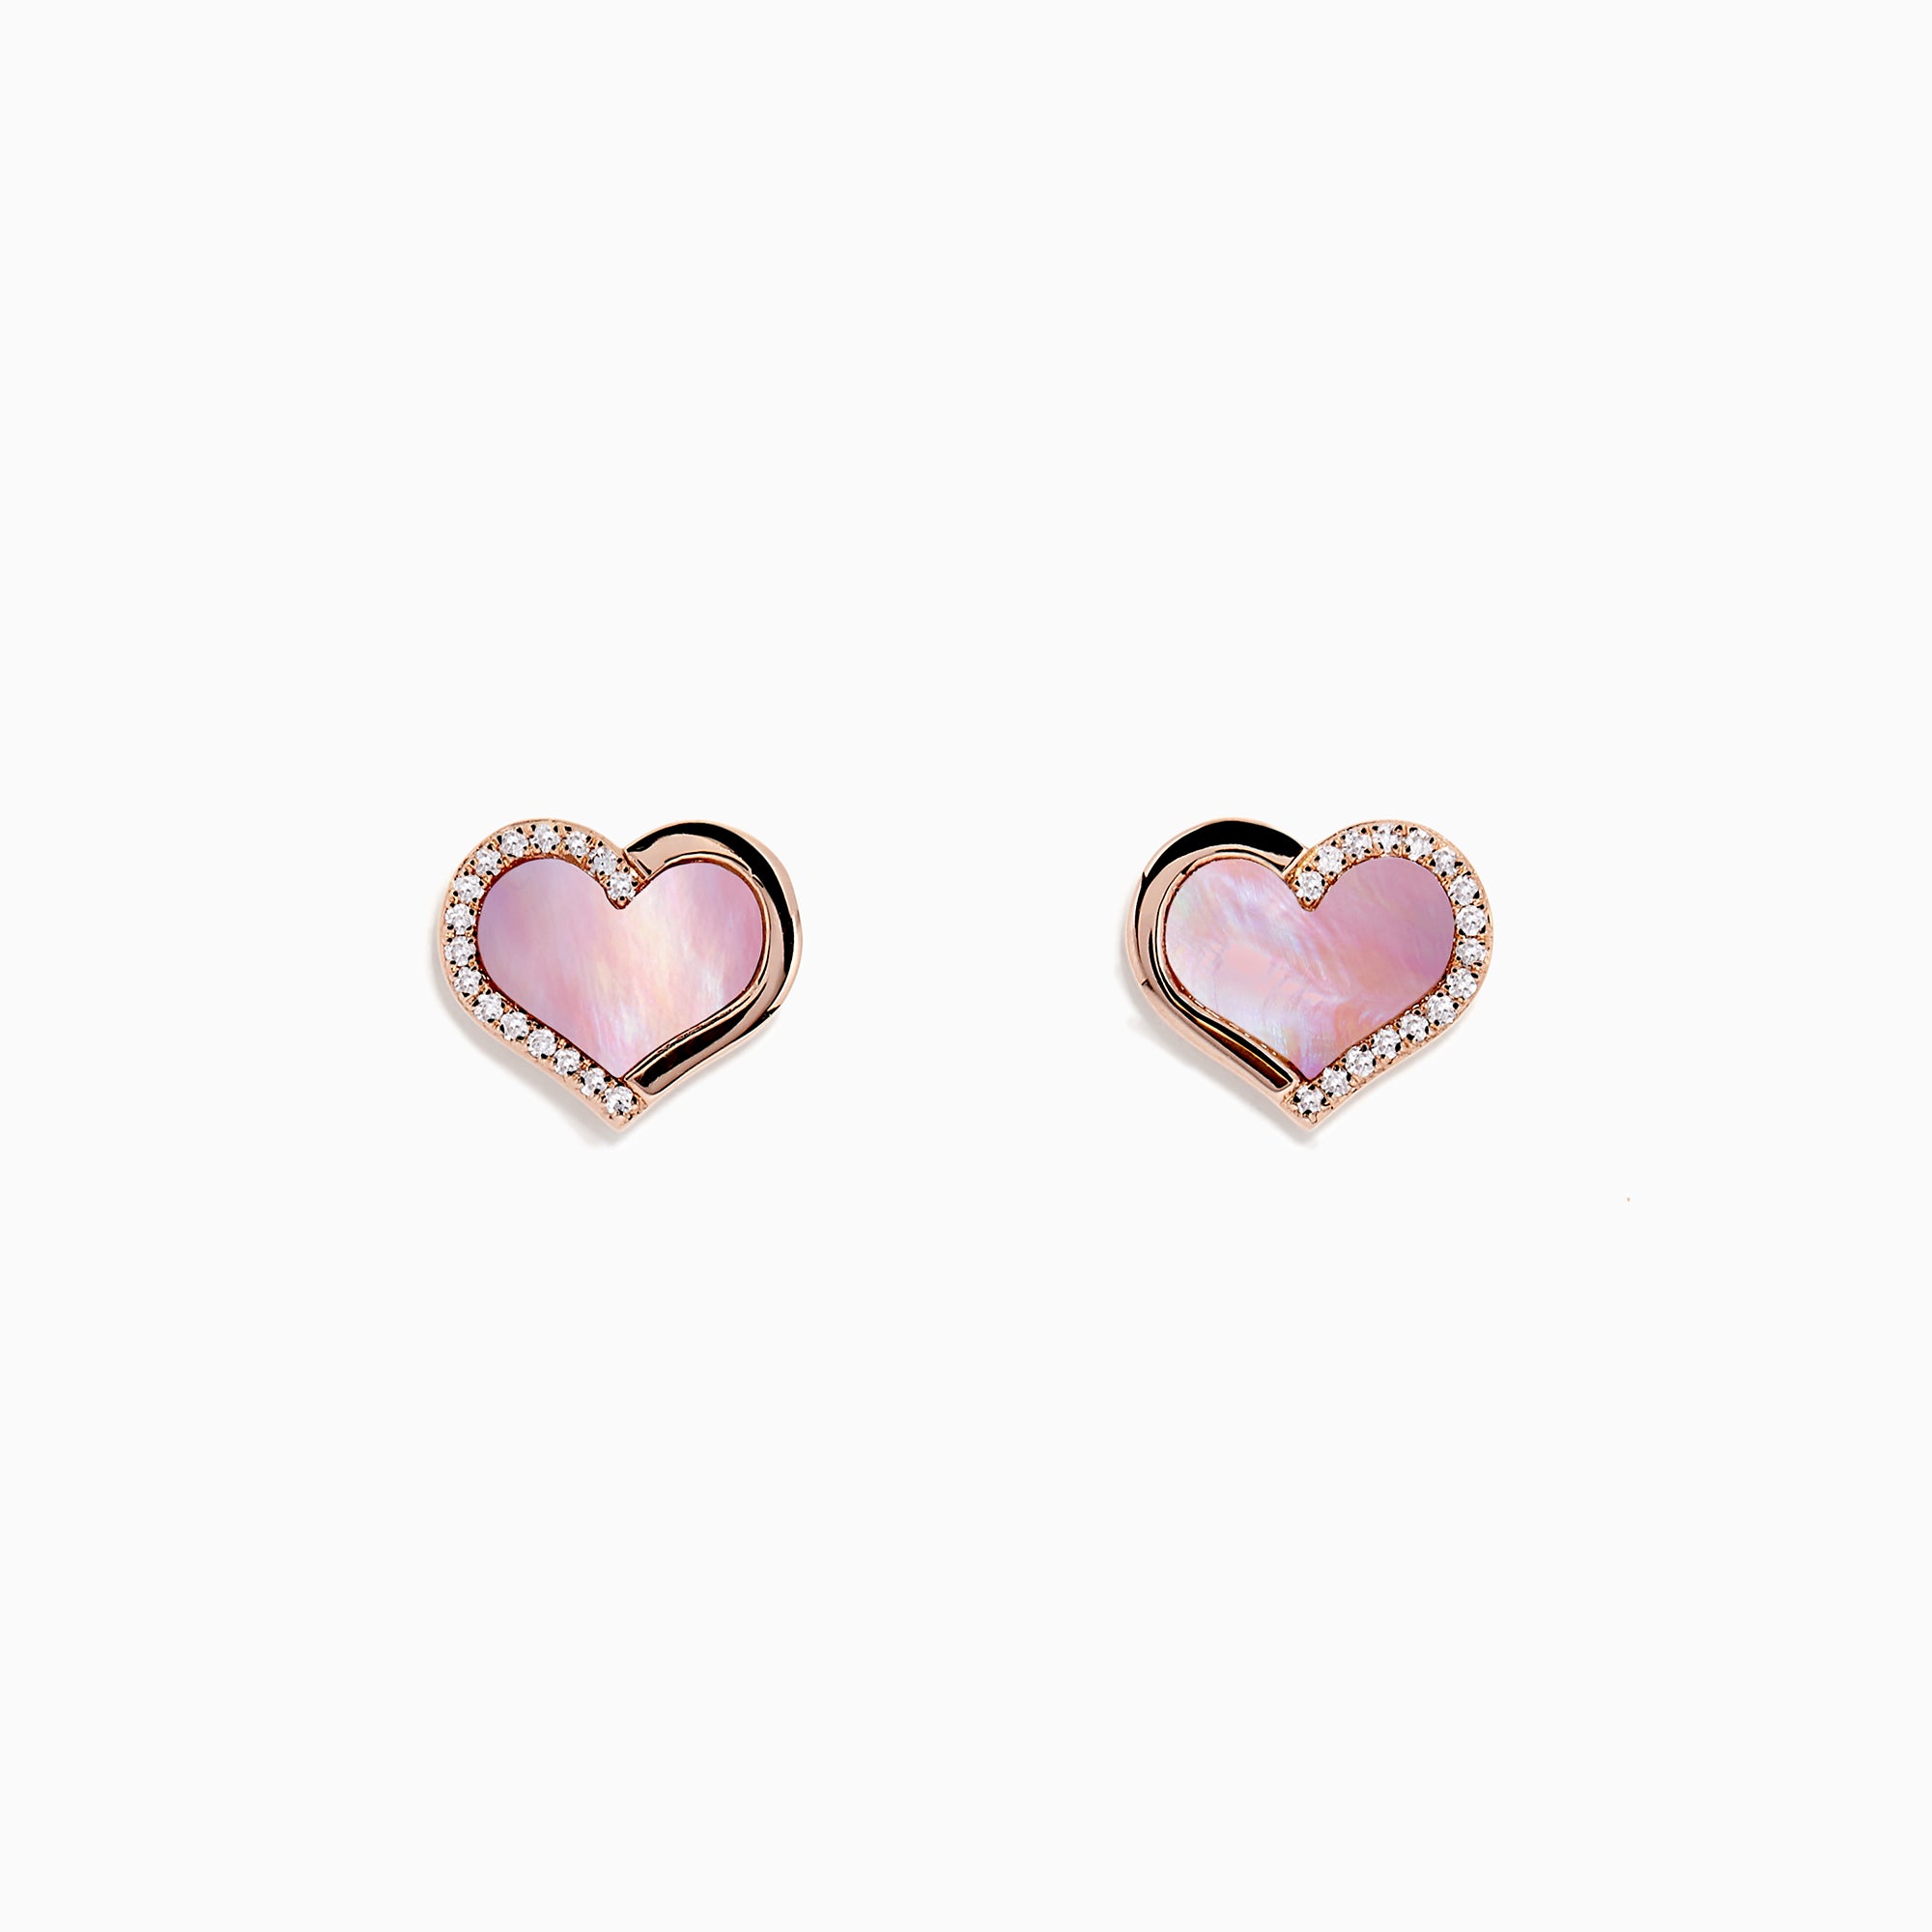 Effy 14K Rose Gold Mother of Pearl and Diamond Heart Earrings, 0.08 TCW